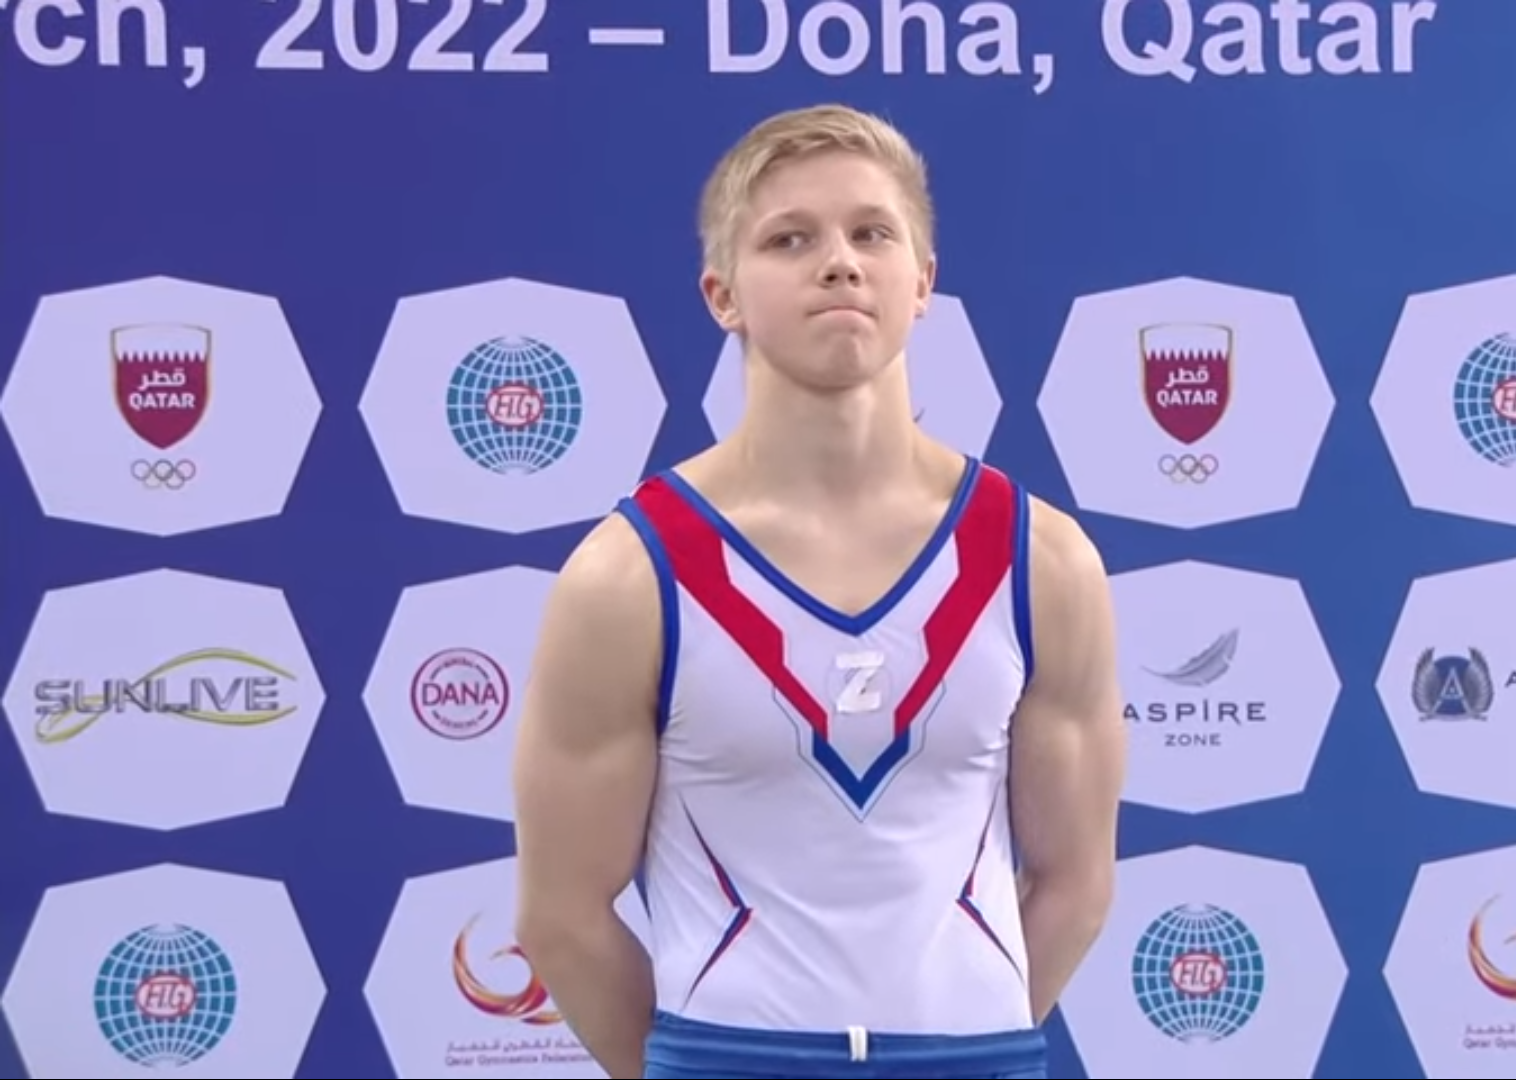 Russian gymnast Kuliak under investigation for wearing "Z" in support of war "would do the same again"